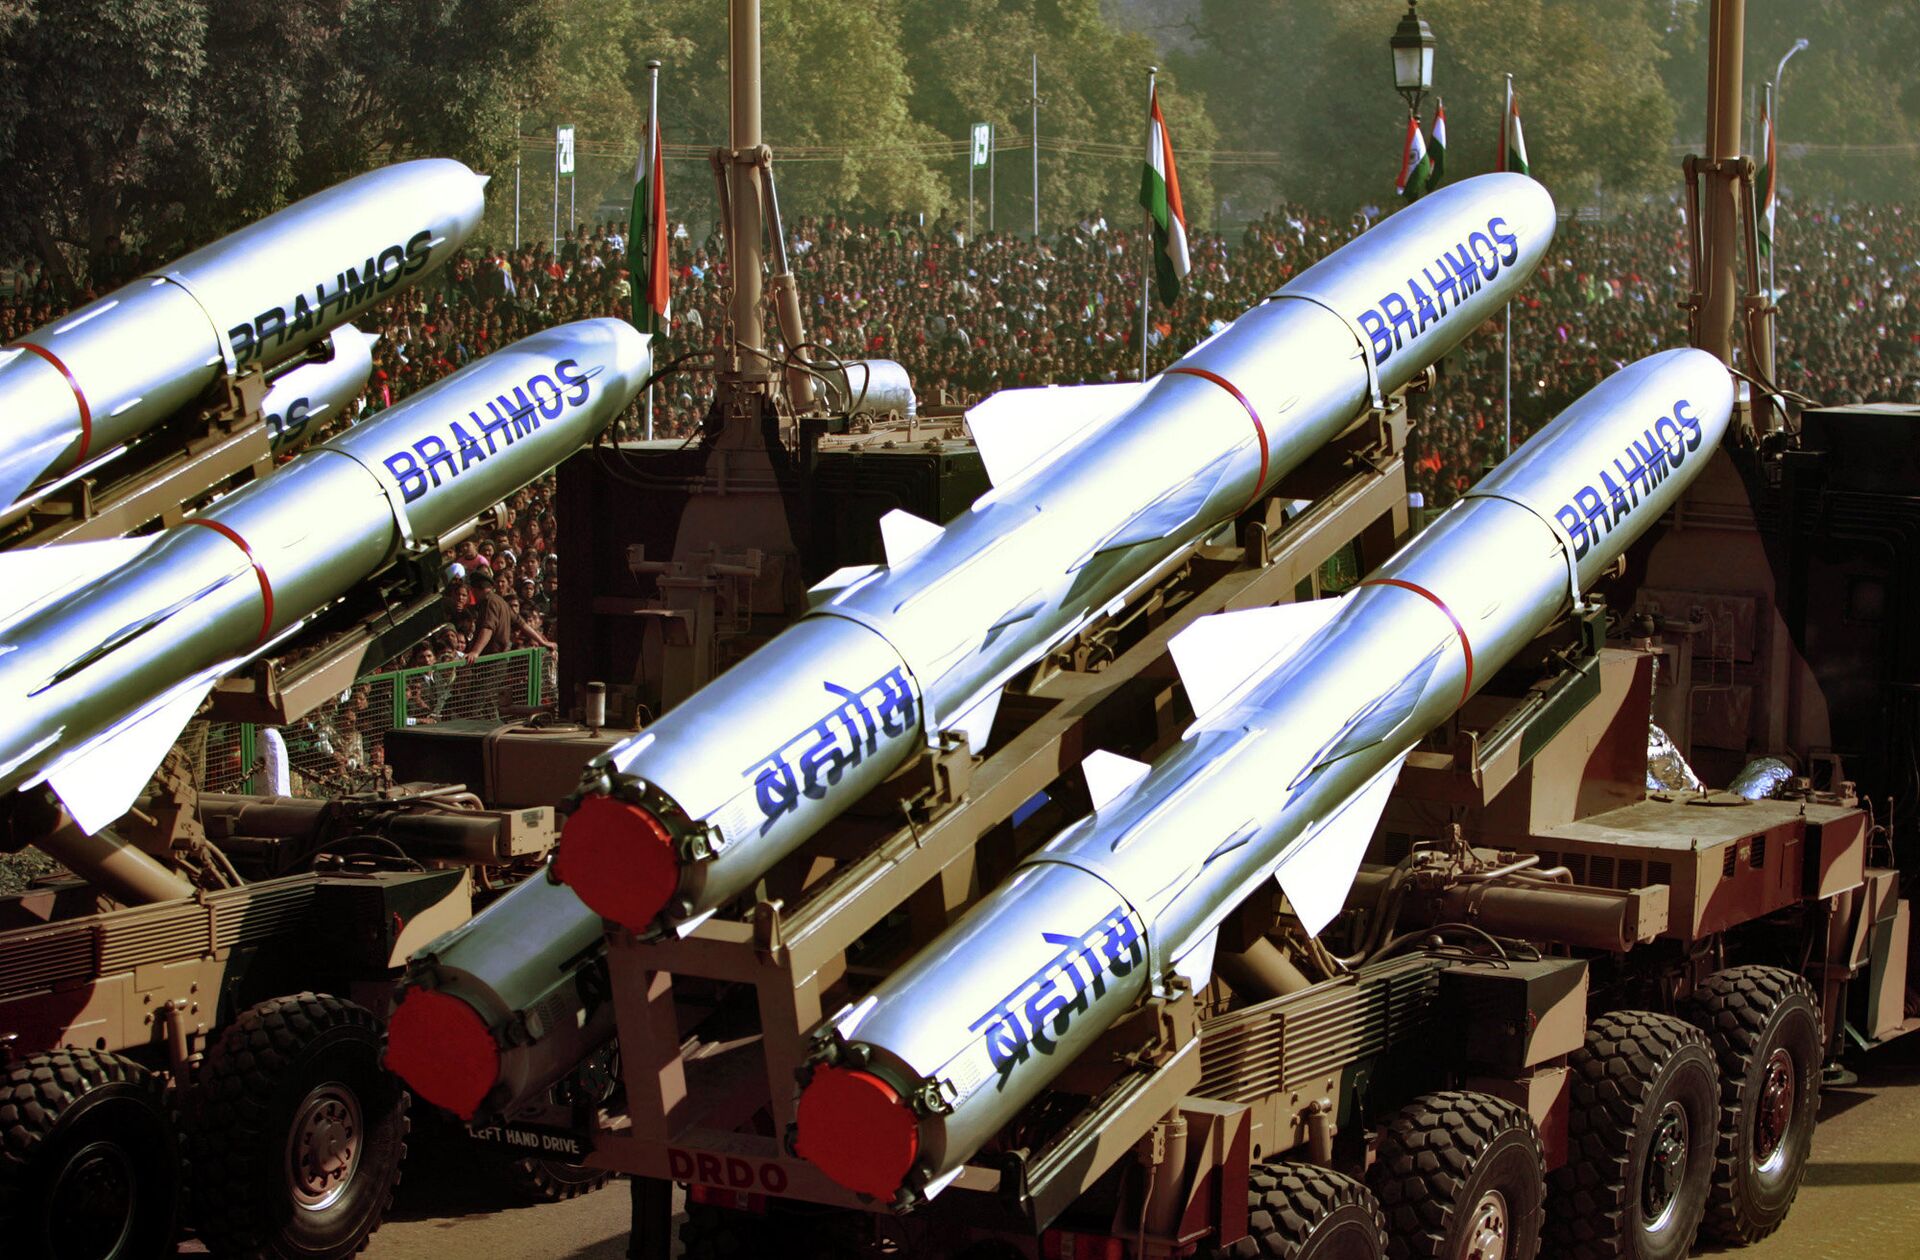 The Indian Army's Brahmos Missiles, a supersonic cruise missile, are displayed during the Republic Day Parade in New Delhi, India. - Sputnik India, 1920, 27.06.2023